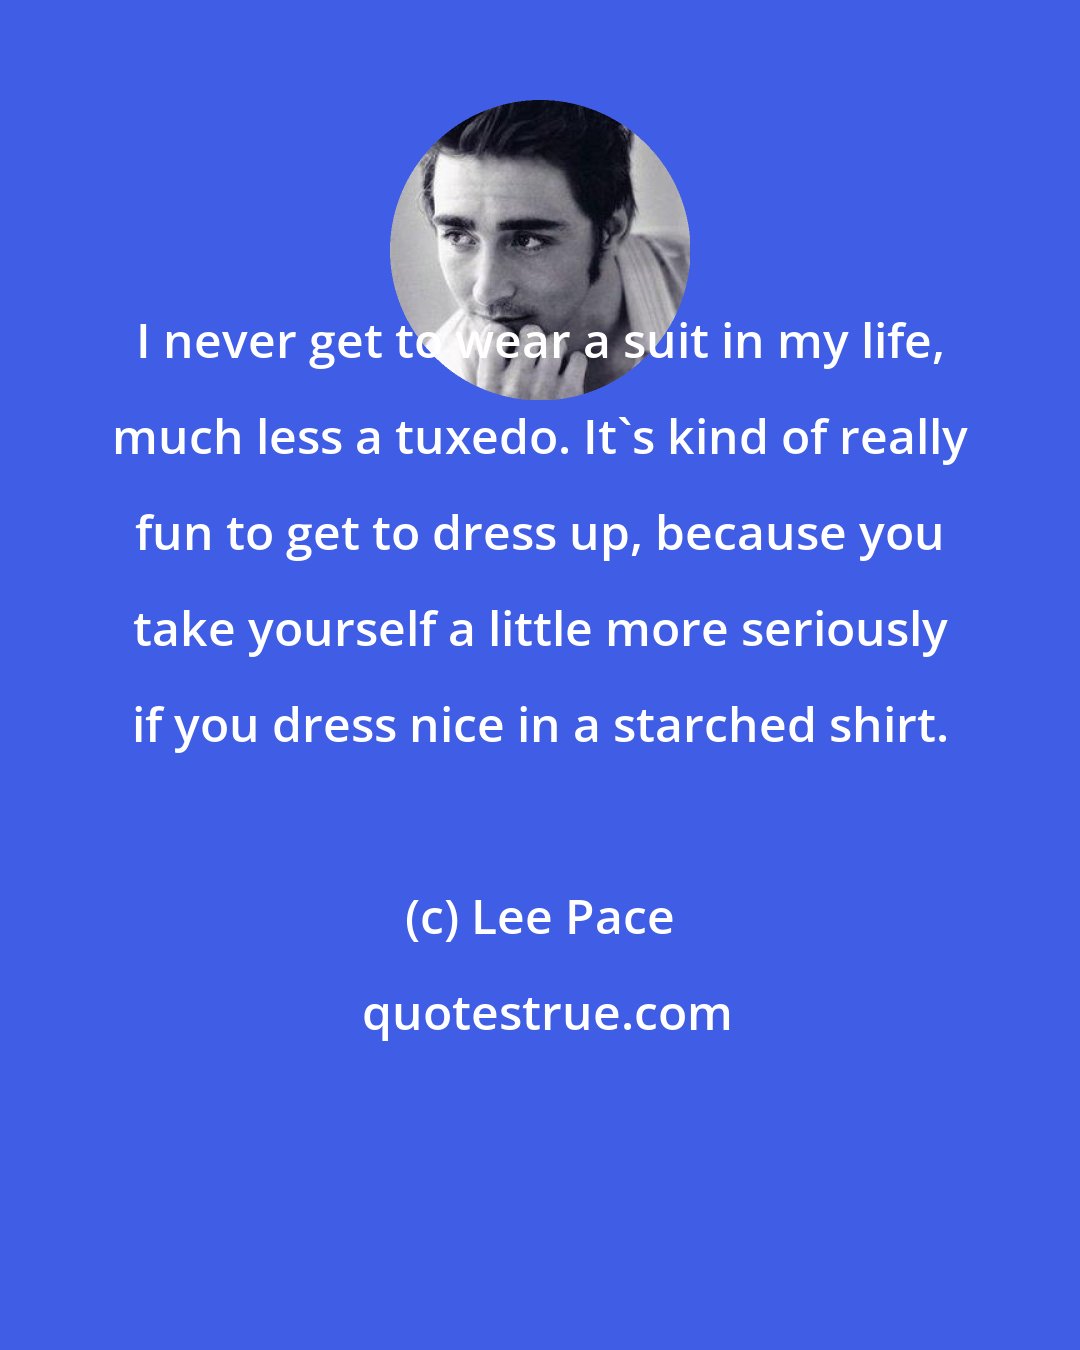 Lee Pace: I never get to wear a suit in my life, much less a tuxedo. It's kind of really fun to get to dress up, because you take yourself a little more seriously if you dress nice in a starched shirt.